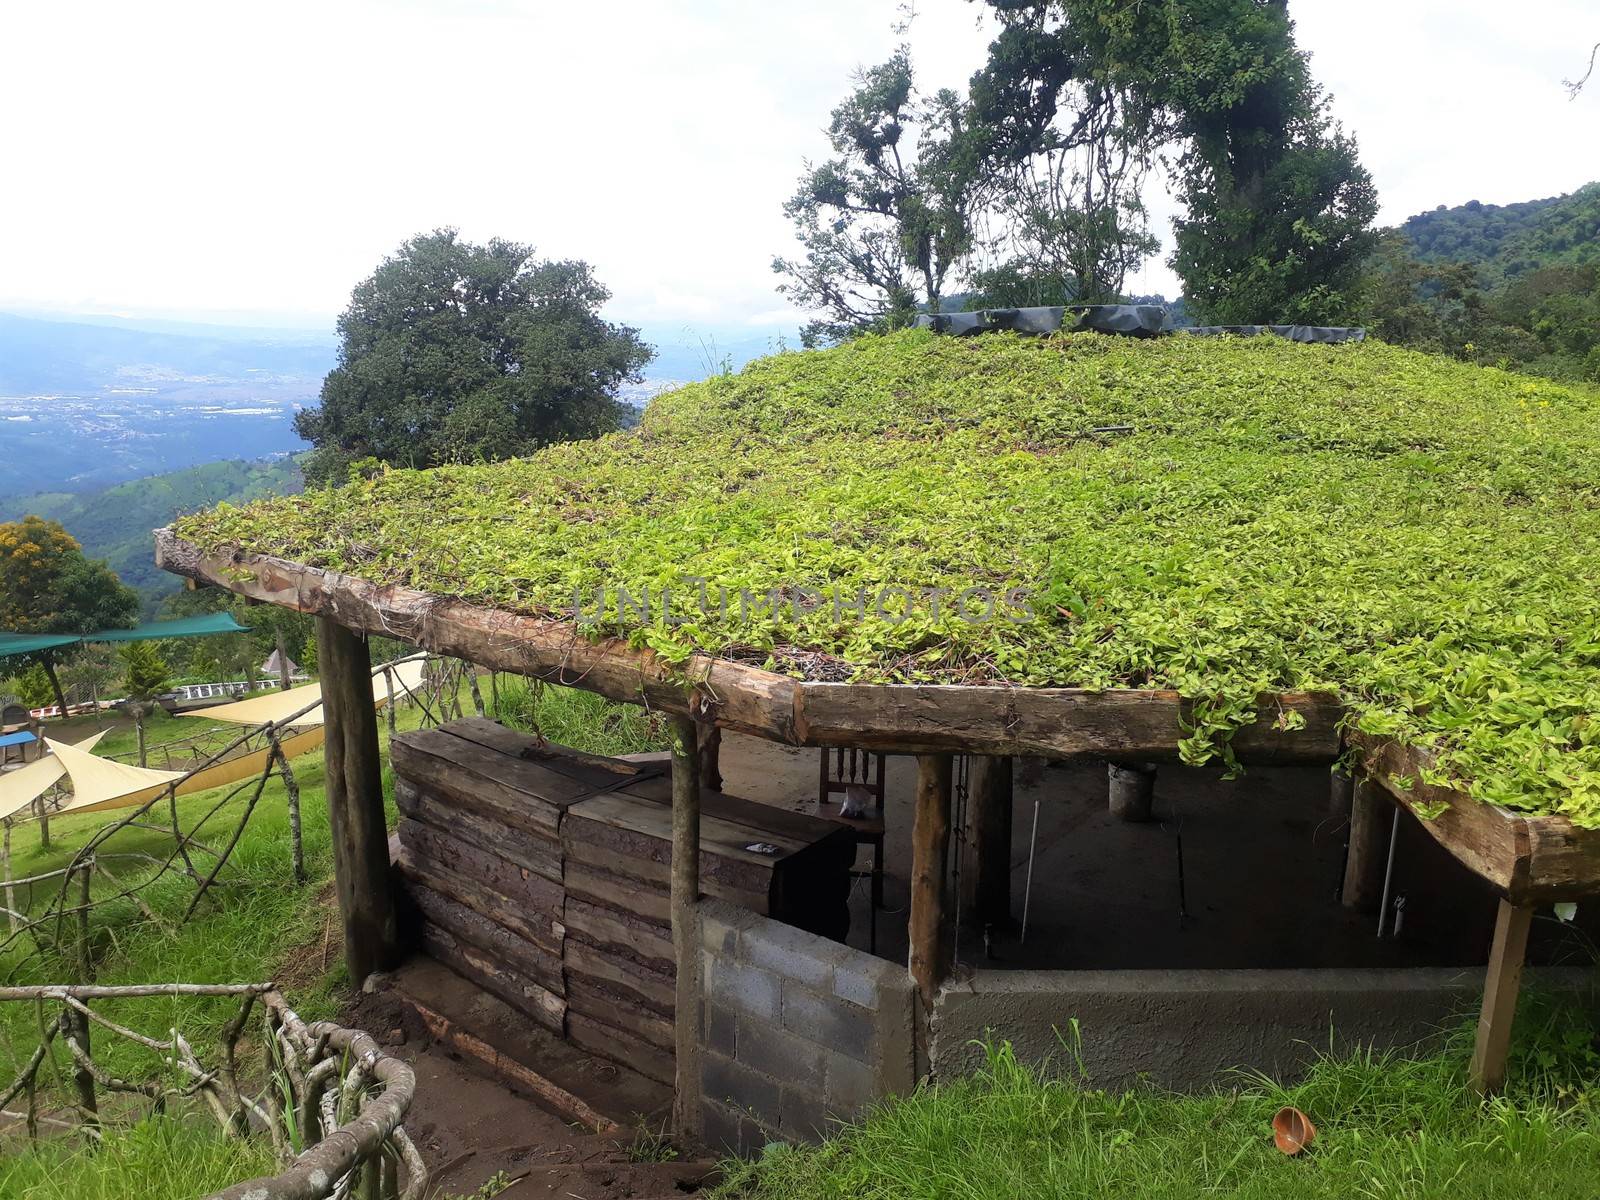 Environment friendly green roof on a timber or wooden building. Sustainable construction in developing countries like Guatemala, Central America. Hobbitanango.